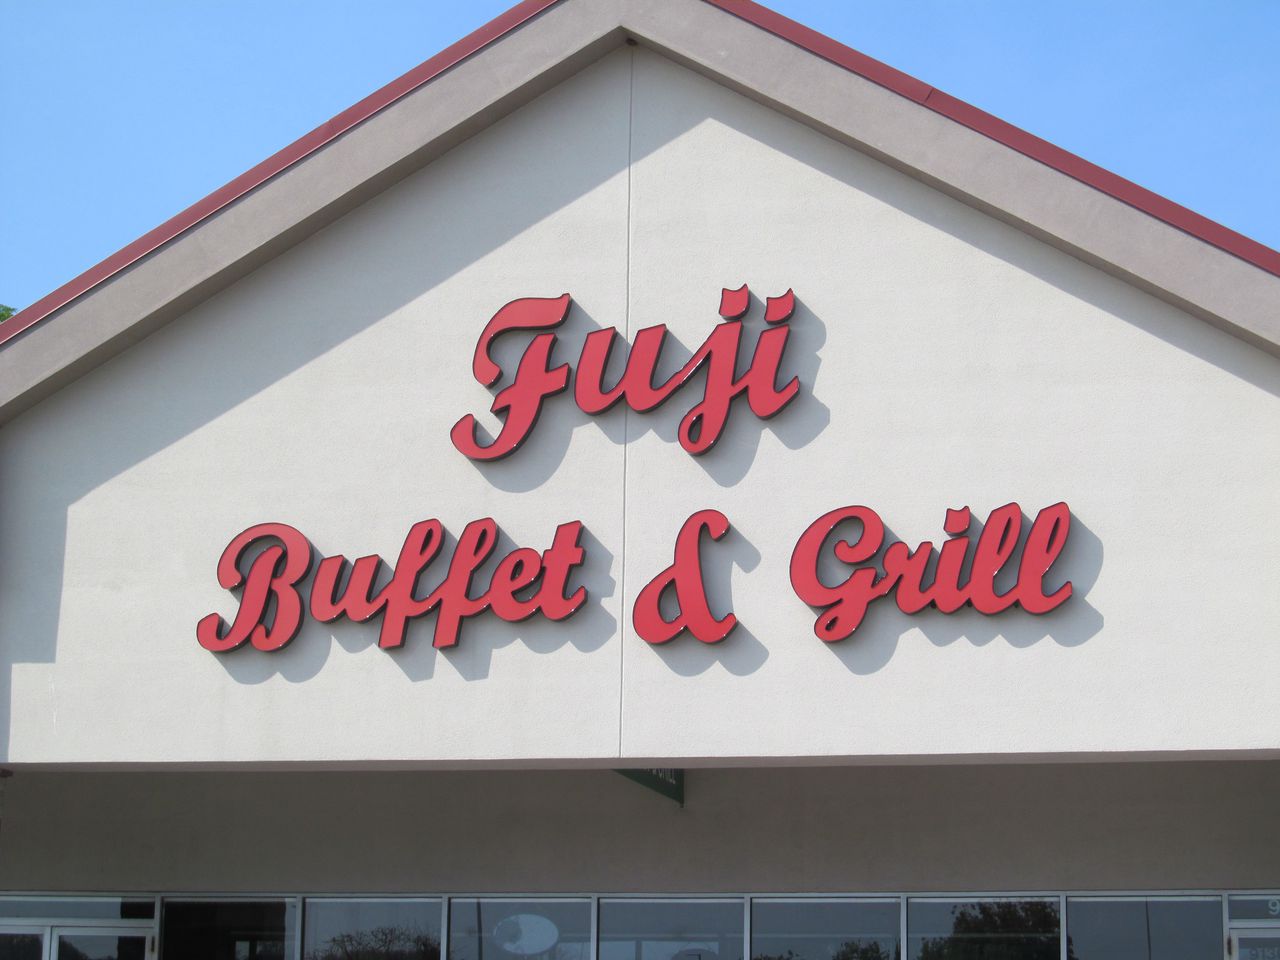 Fuji Buffet & Grill has one of the highest health inspector violation counts in Lake County.